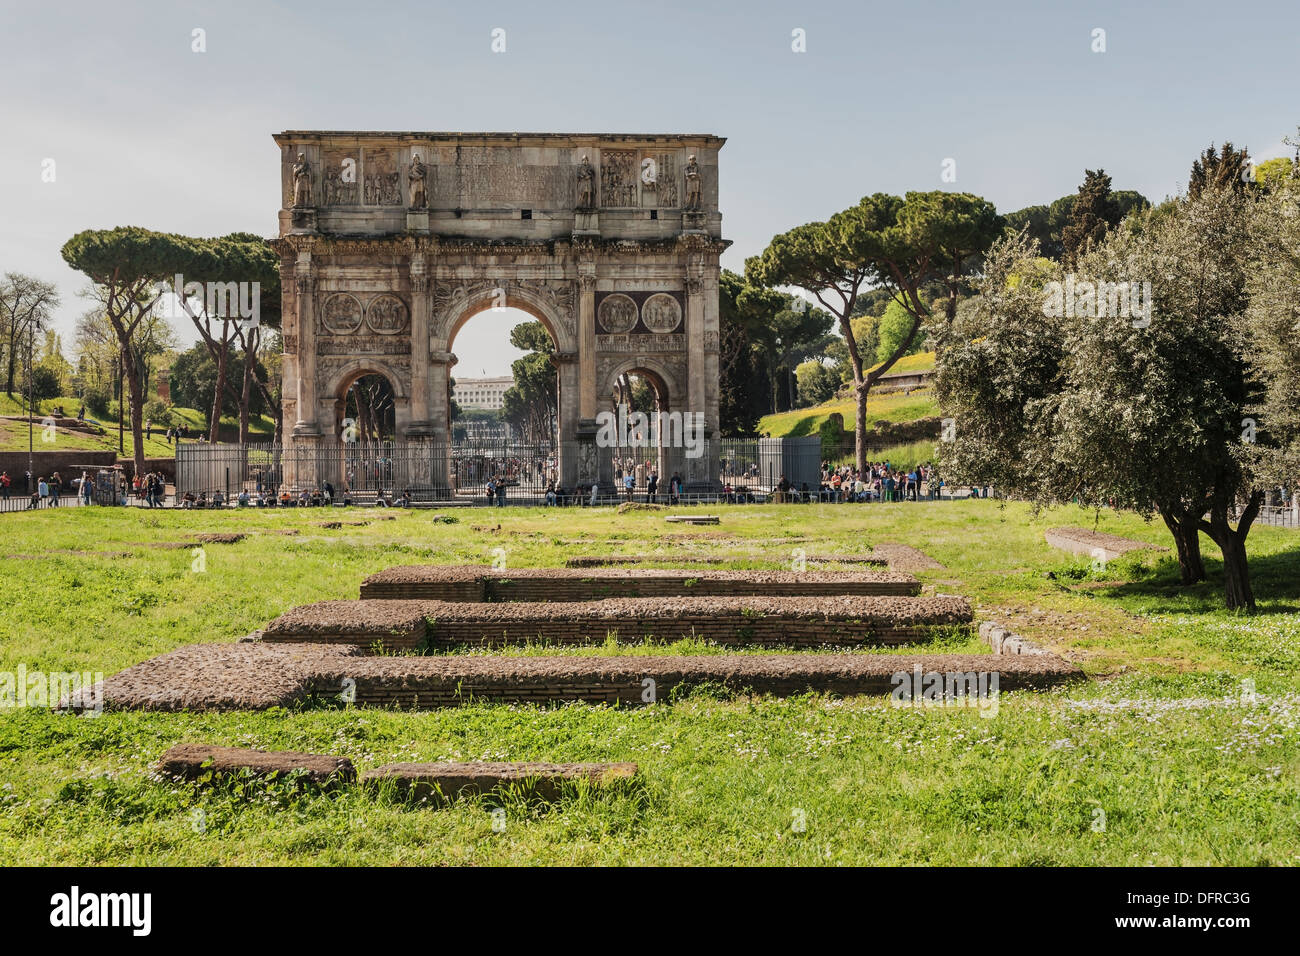 The Arch of Constantine (Arco di Costantino) is located in front of the Colosseum, Rome, Lazio, Italy, Europe Stock Photo